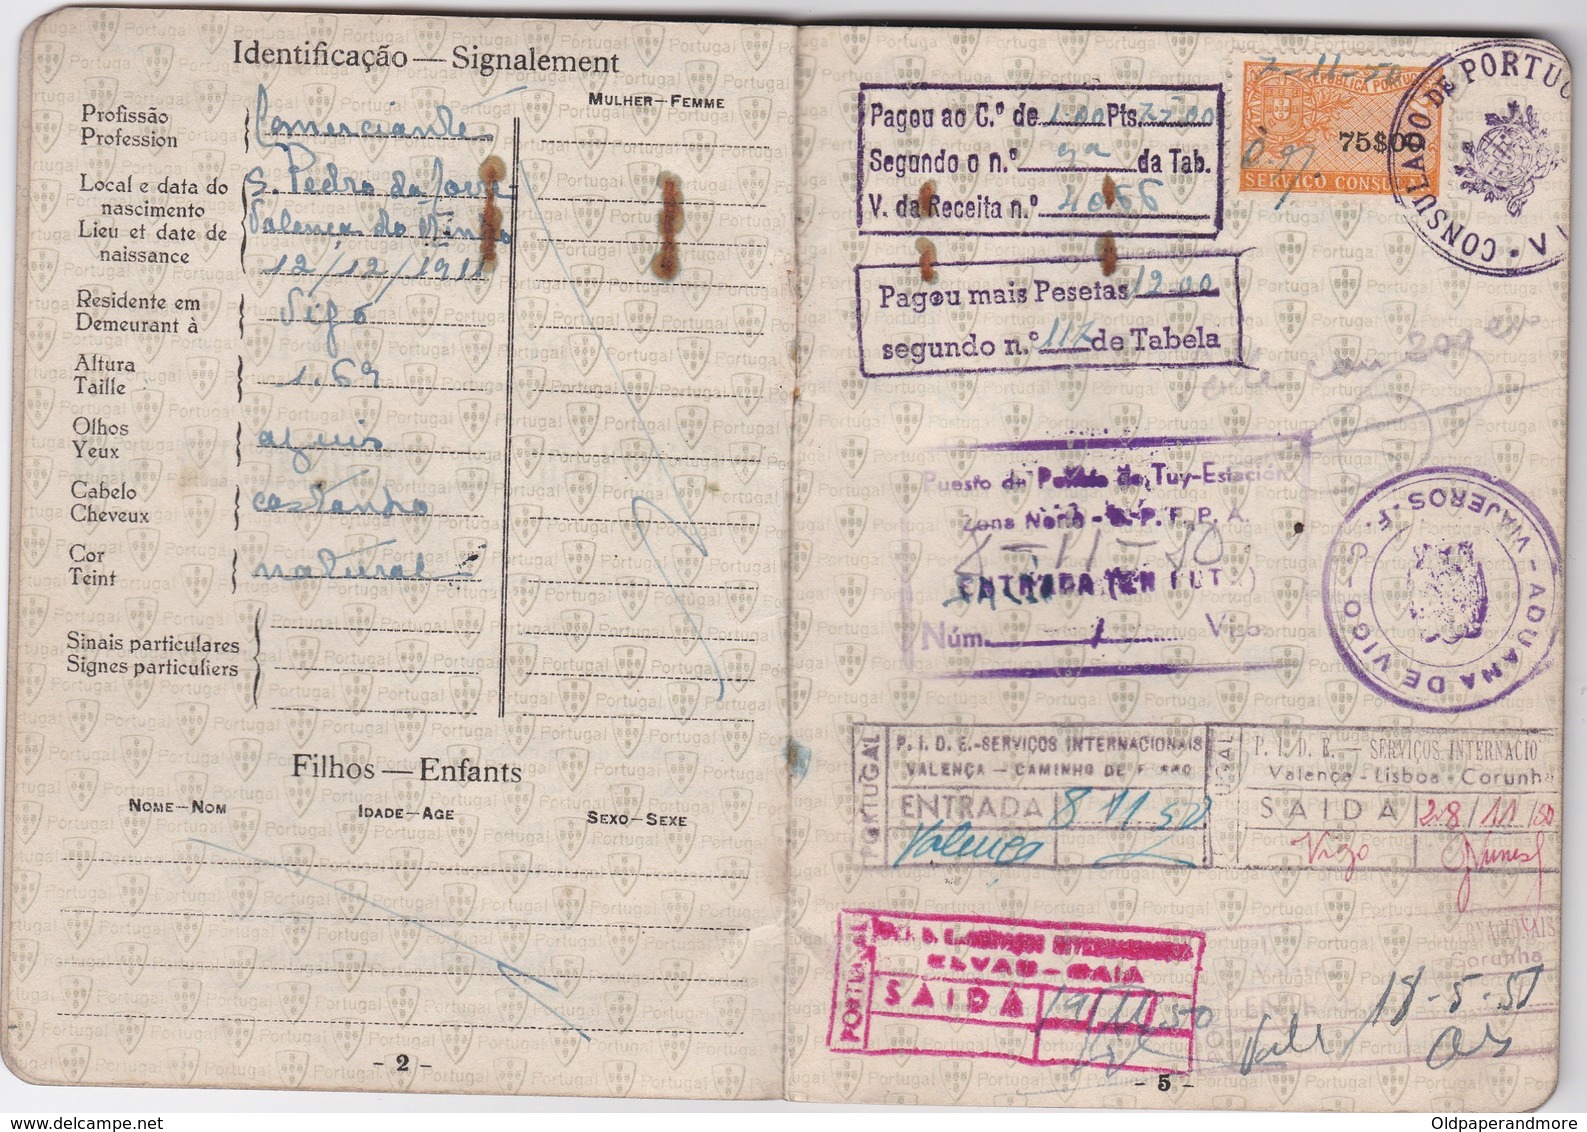 PORTUGAL PASSEPORT  PASSAPORTE REISEPASS - WITH CONSULAR REVENUE FISCAL STAMP - PIDE / DGS - POLITICAL POLICE 1950 - Historical Documents